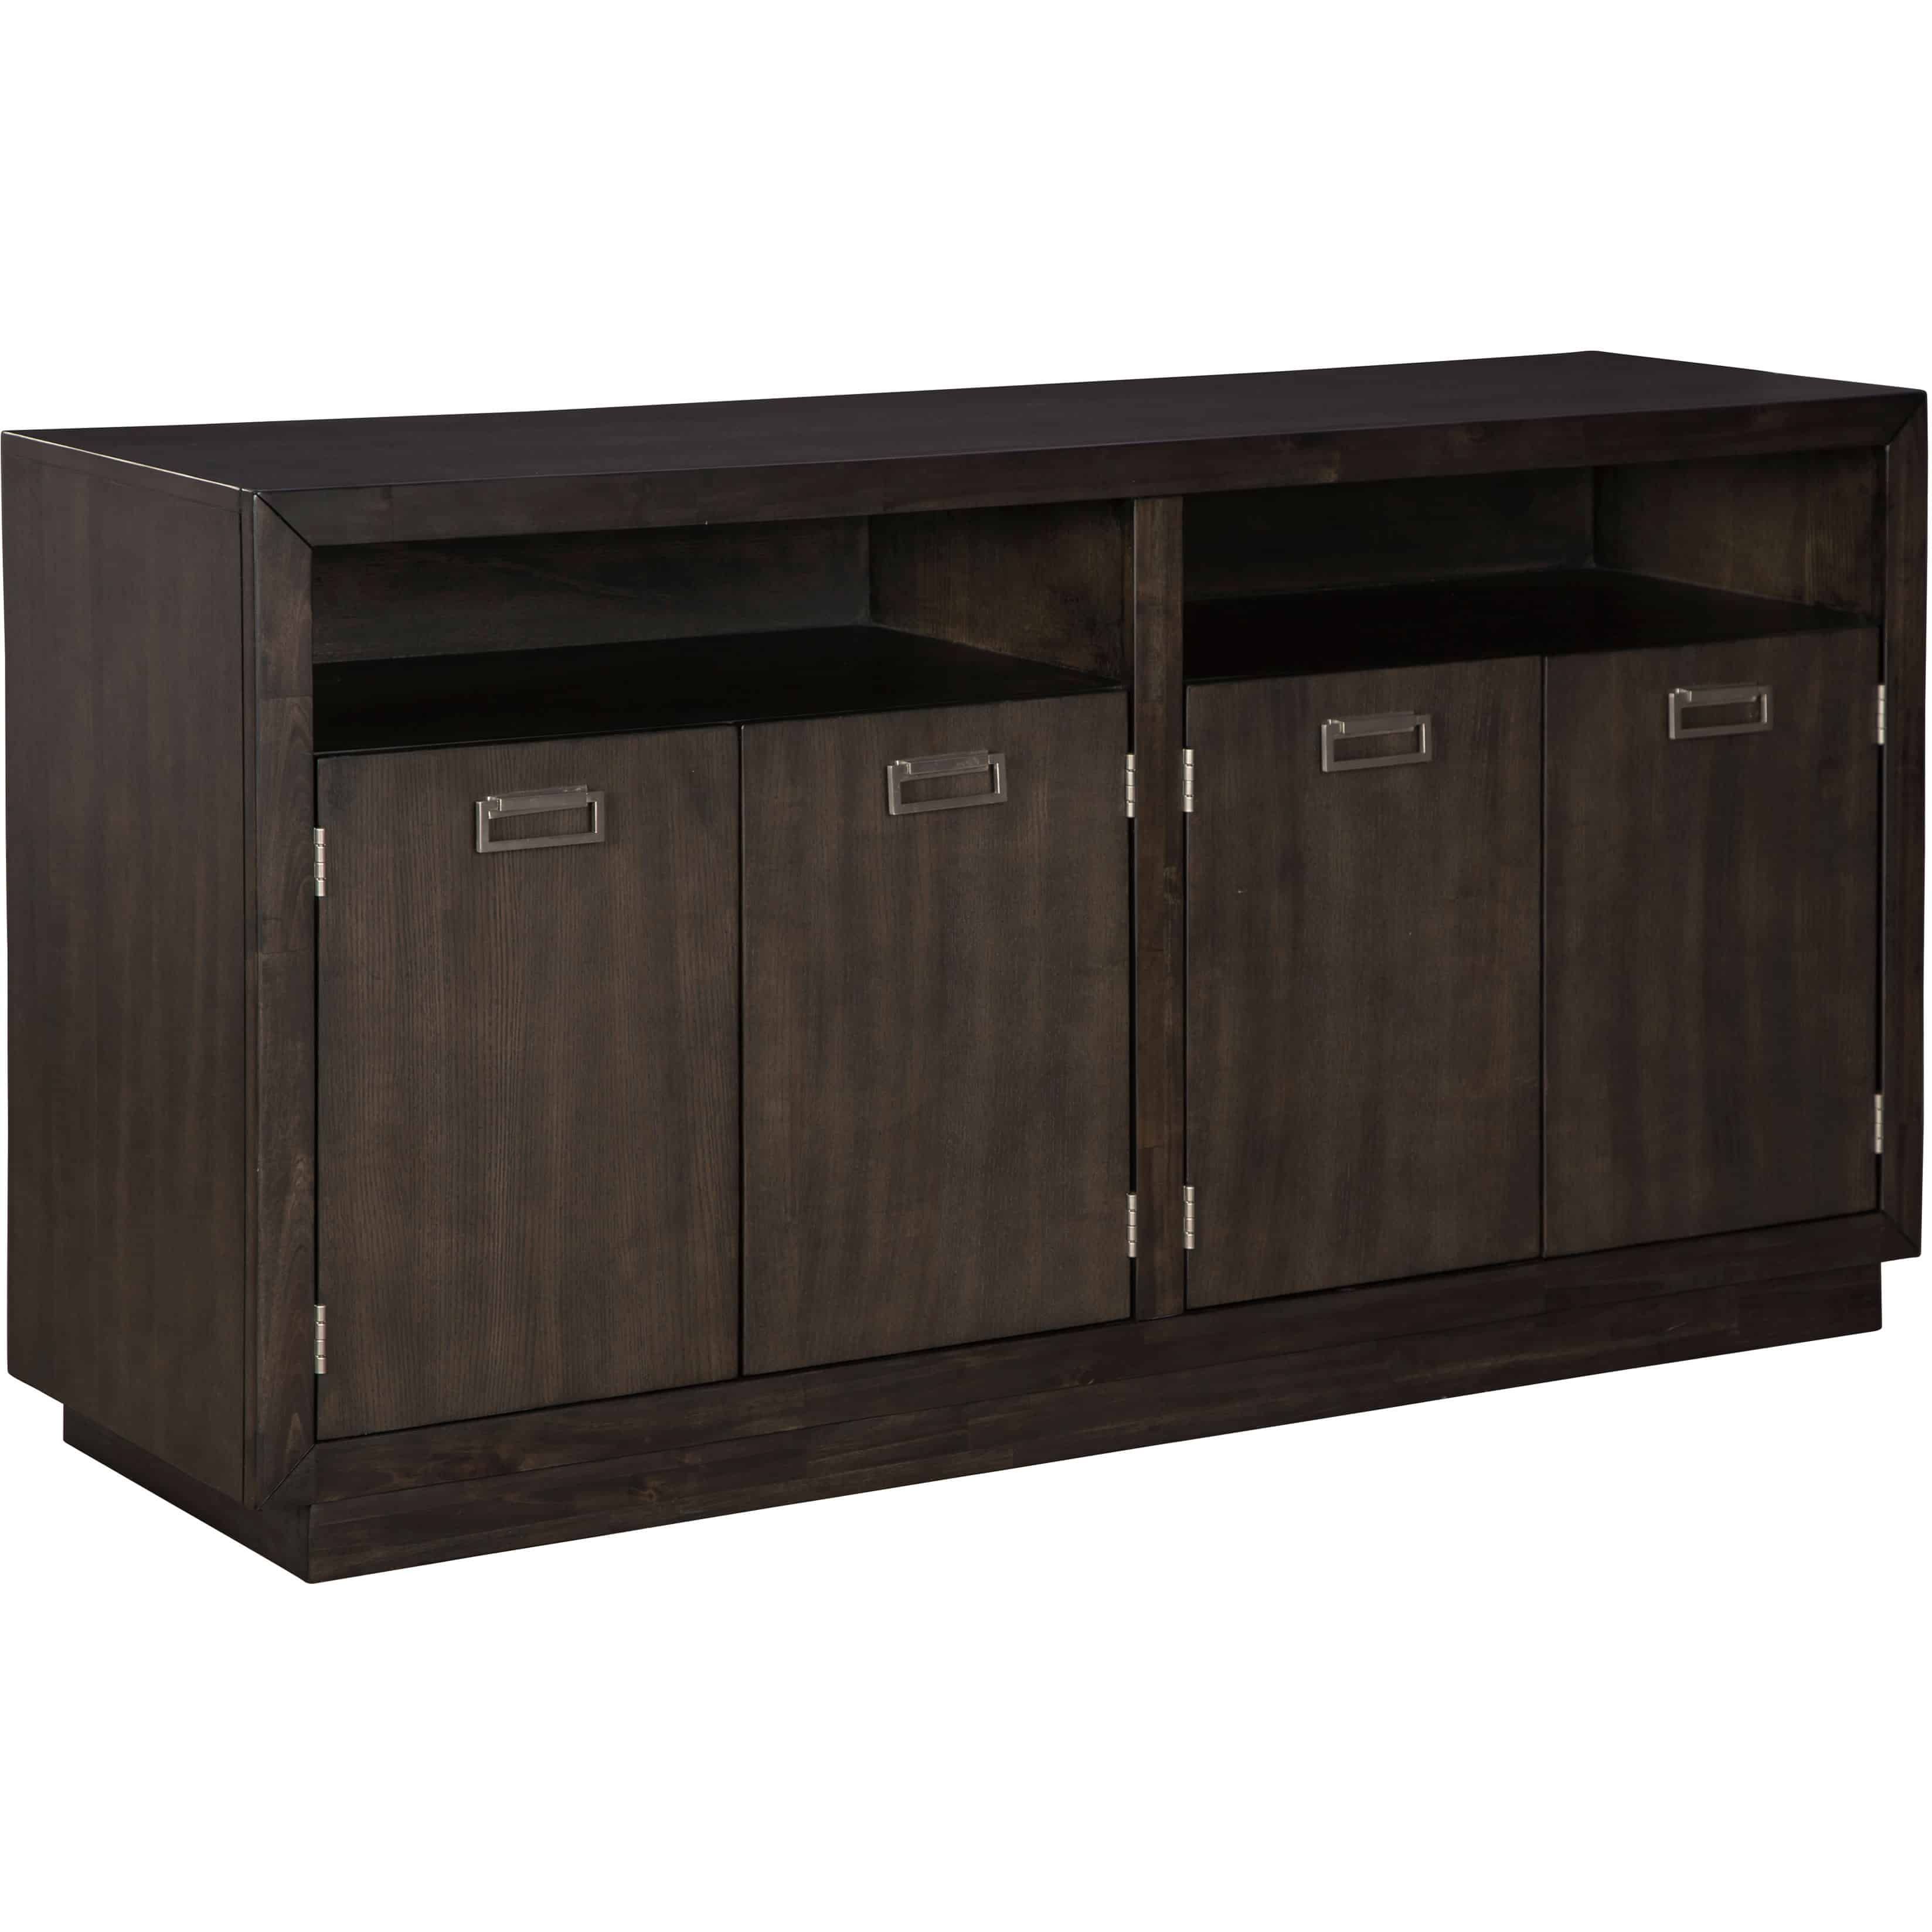 Hyndell Dining Room Server Throughout Bright Angles Credenzas (View 15 of 30)